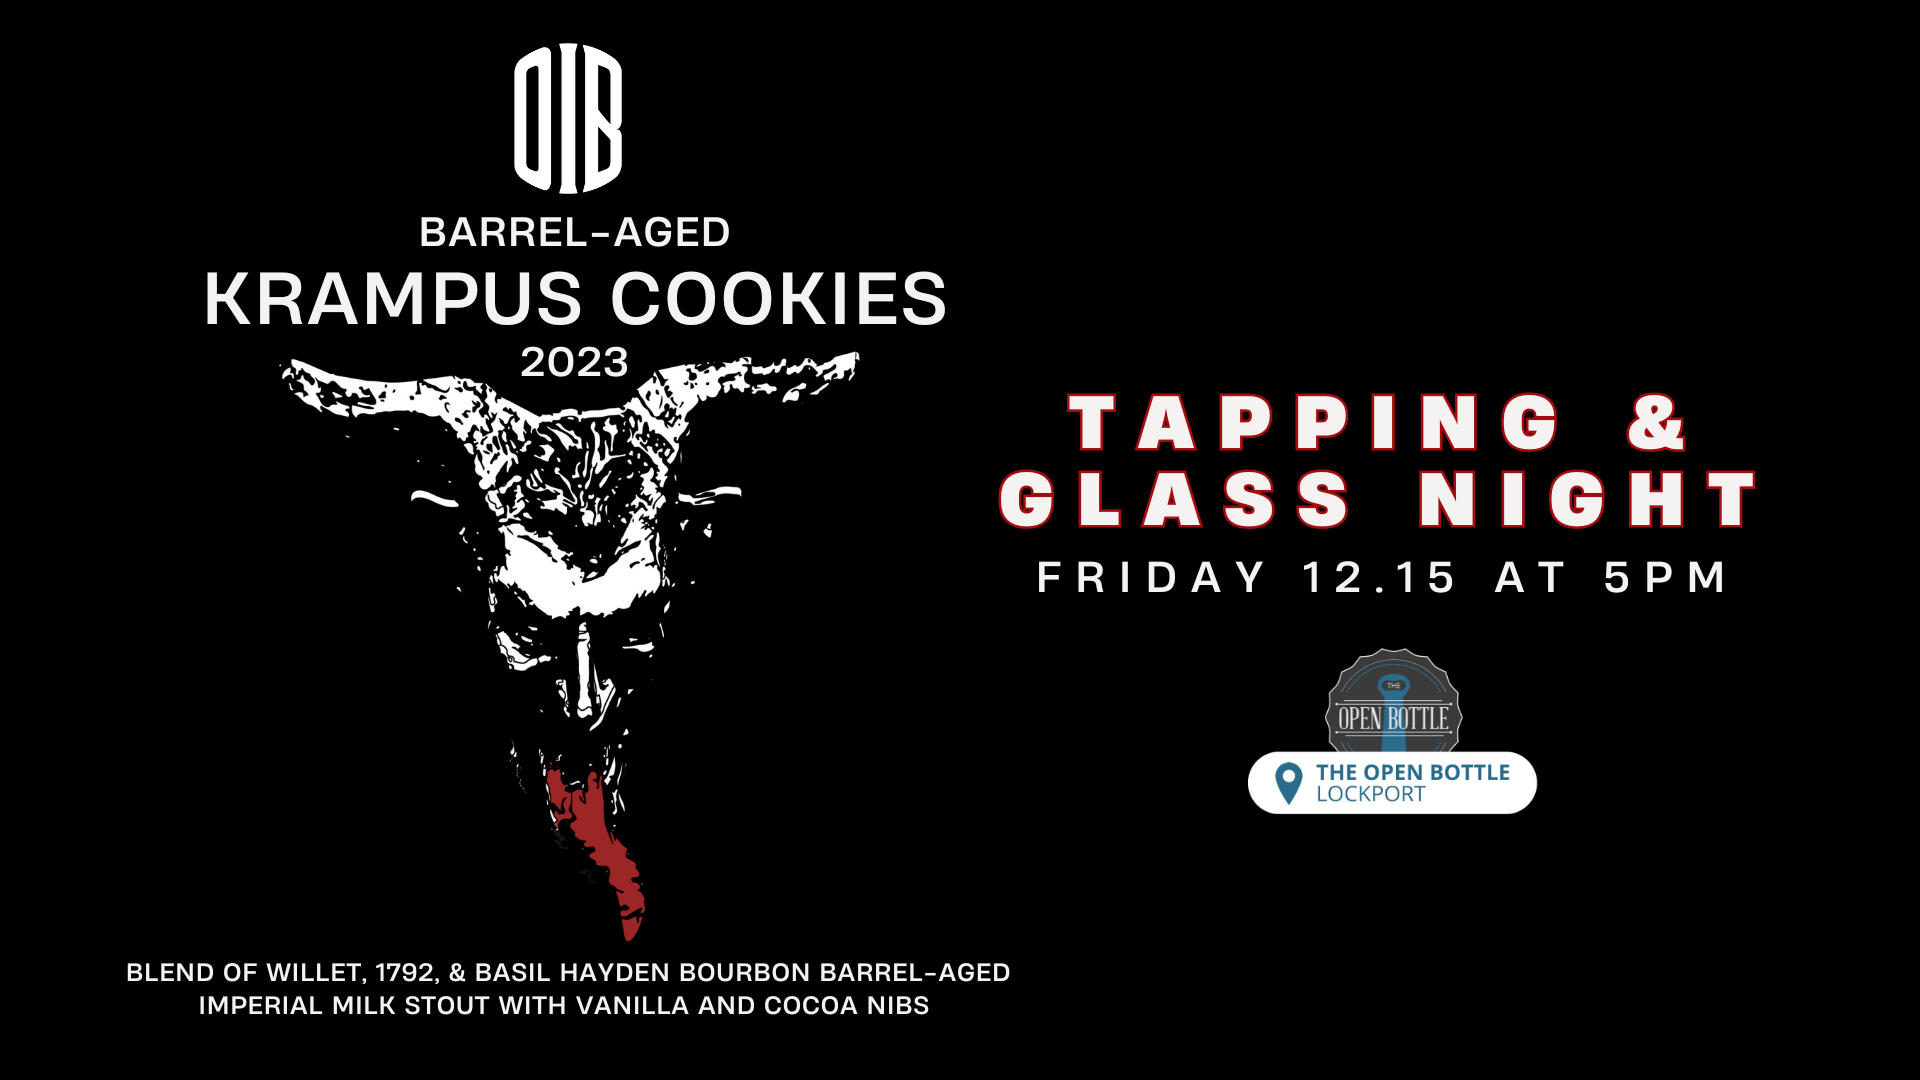 Event: Old Irving Barrel-Aged Krampus Cookies Tapping & Glass Night